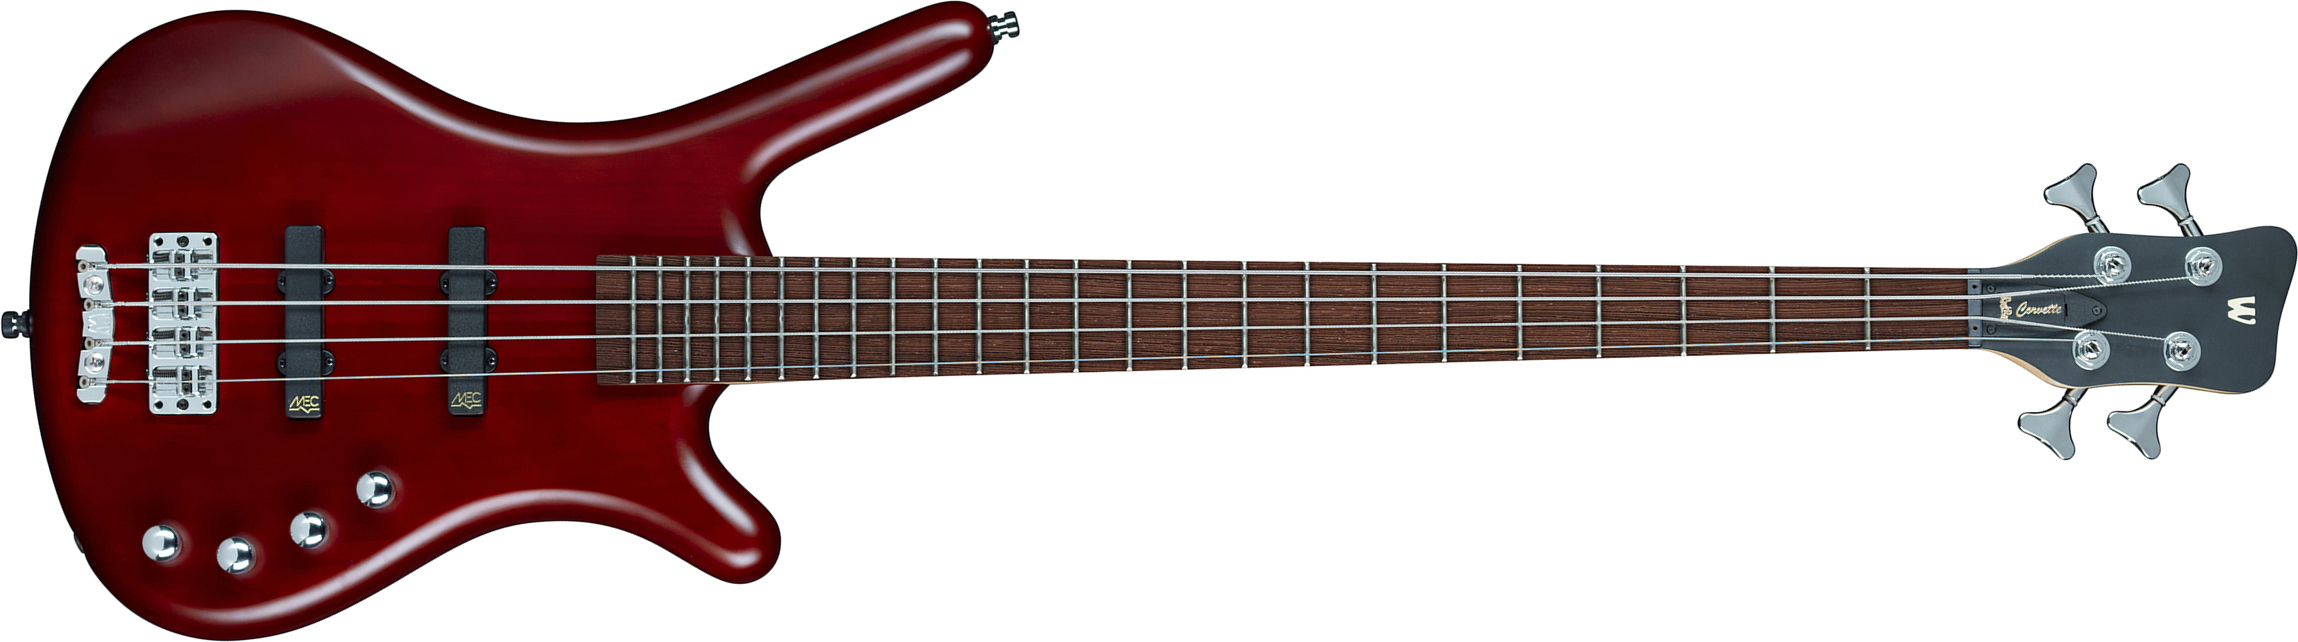 Warwick Corvette Basic 4 Strings Rockbass Active Wen - Burgundy Red Satin - Solid body electric bass - Main picture